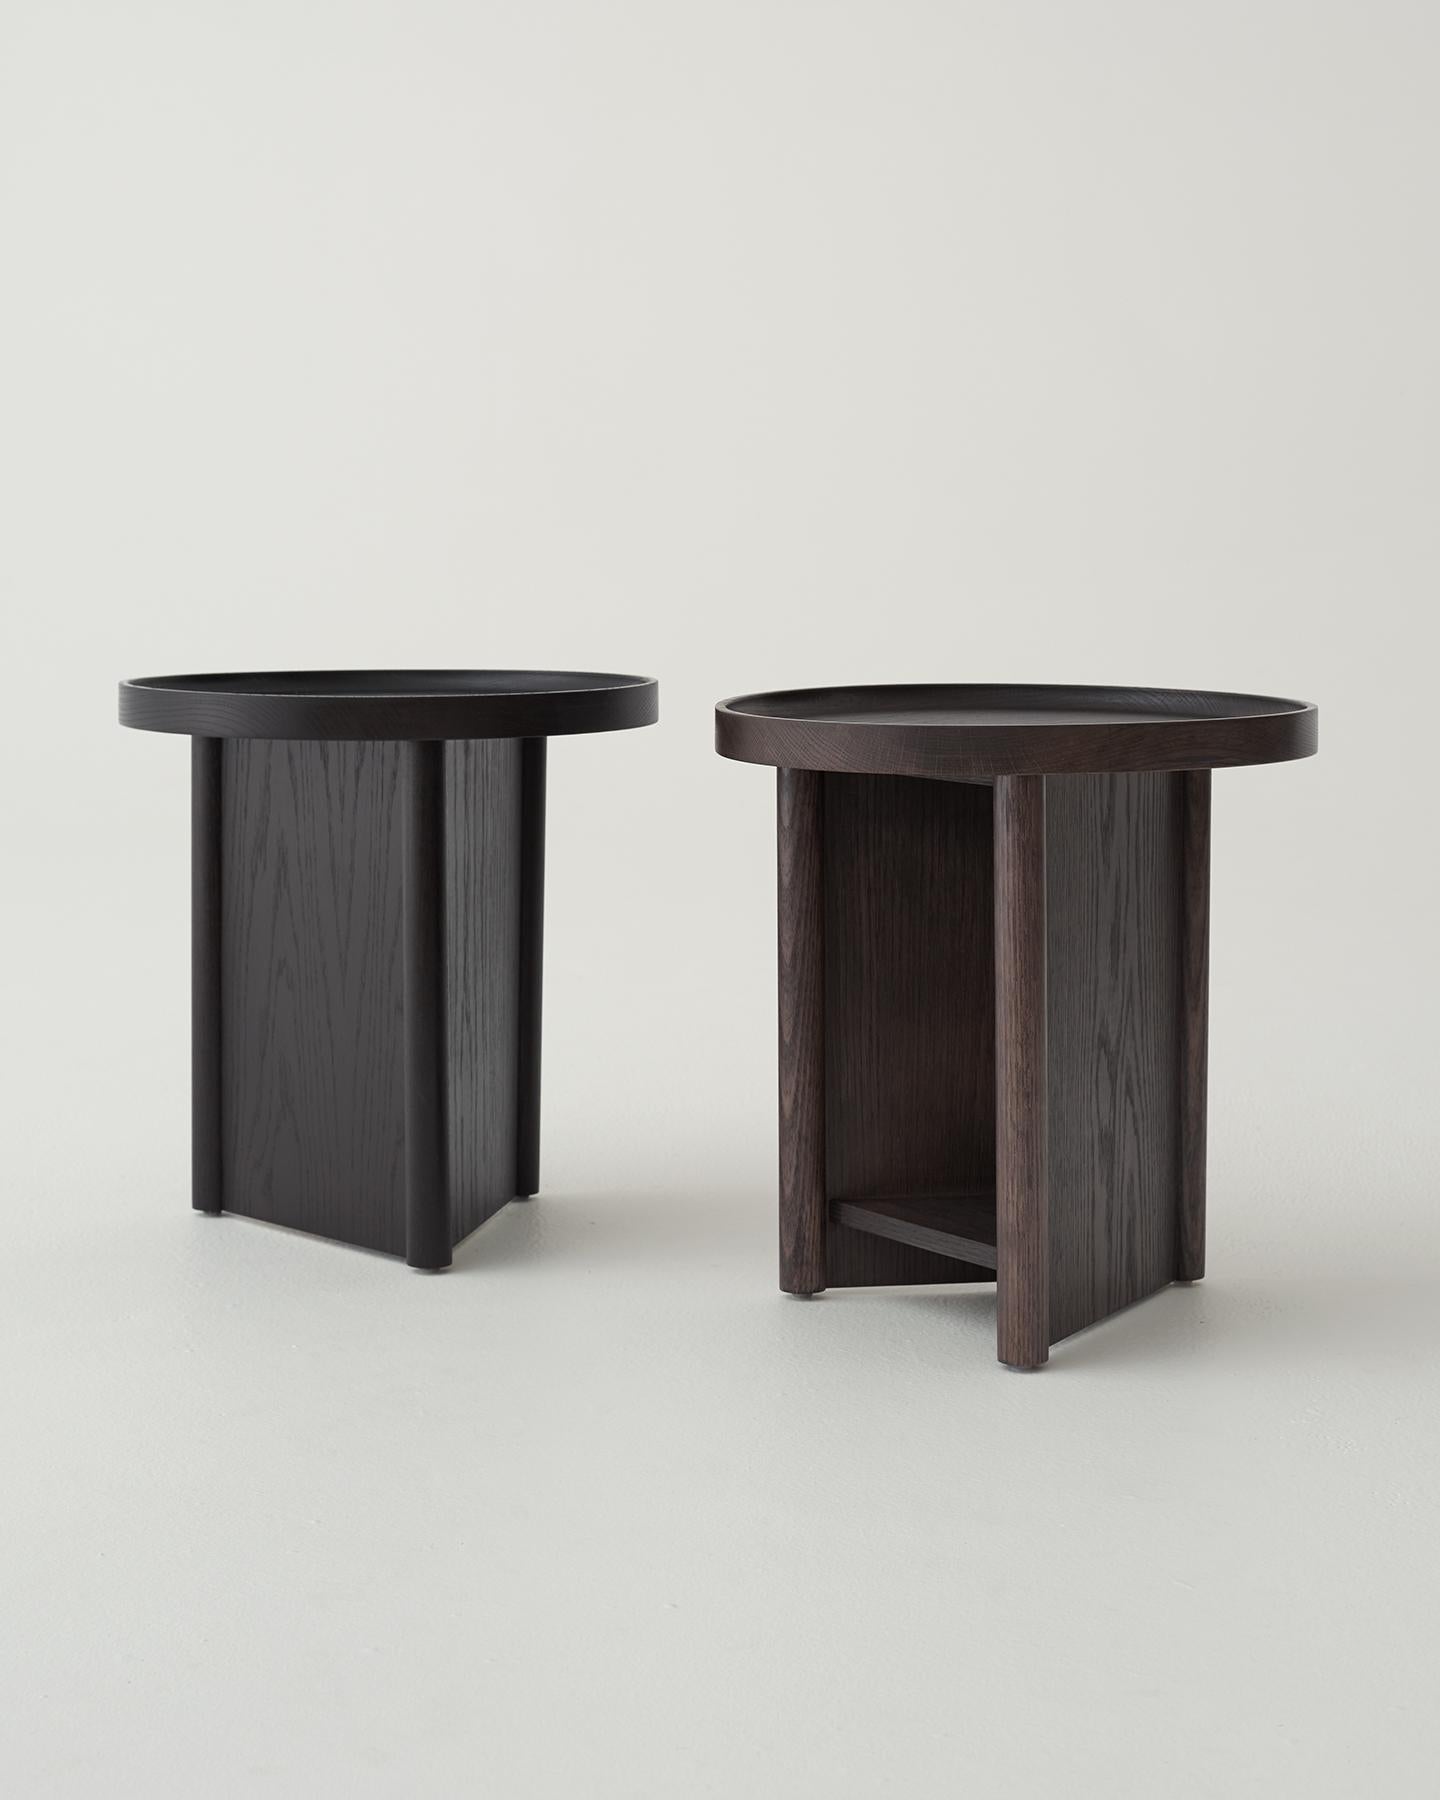 Malibu Side Table by Daniel Boddam, Smoked or Stained Oak In New Condition For Sale In Sydney, NSW